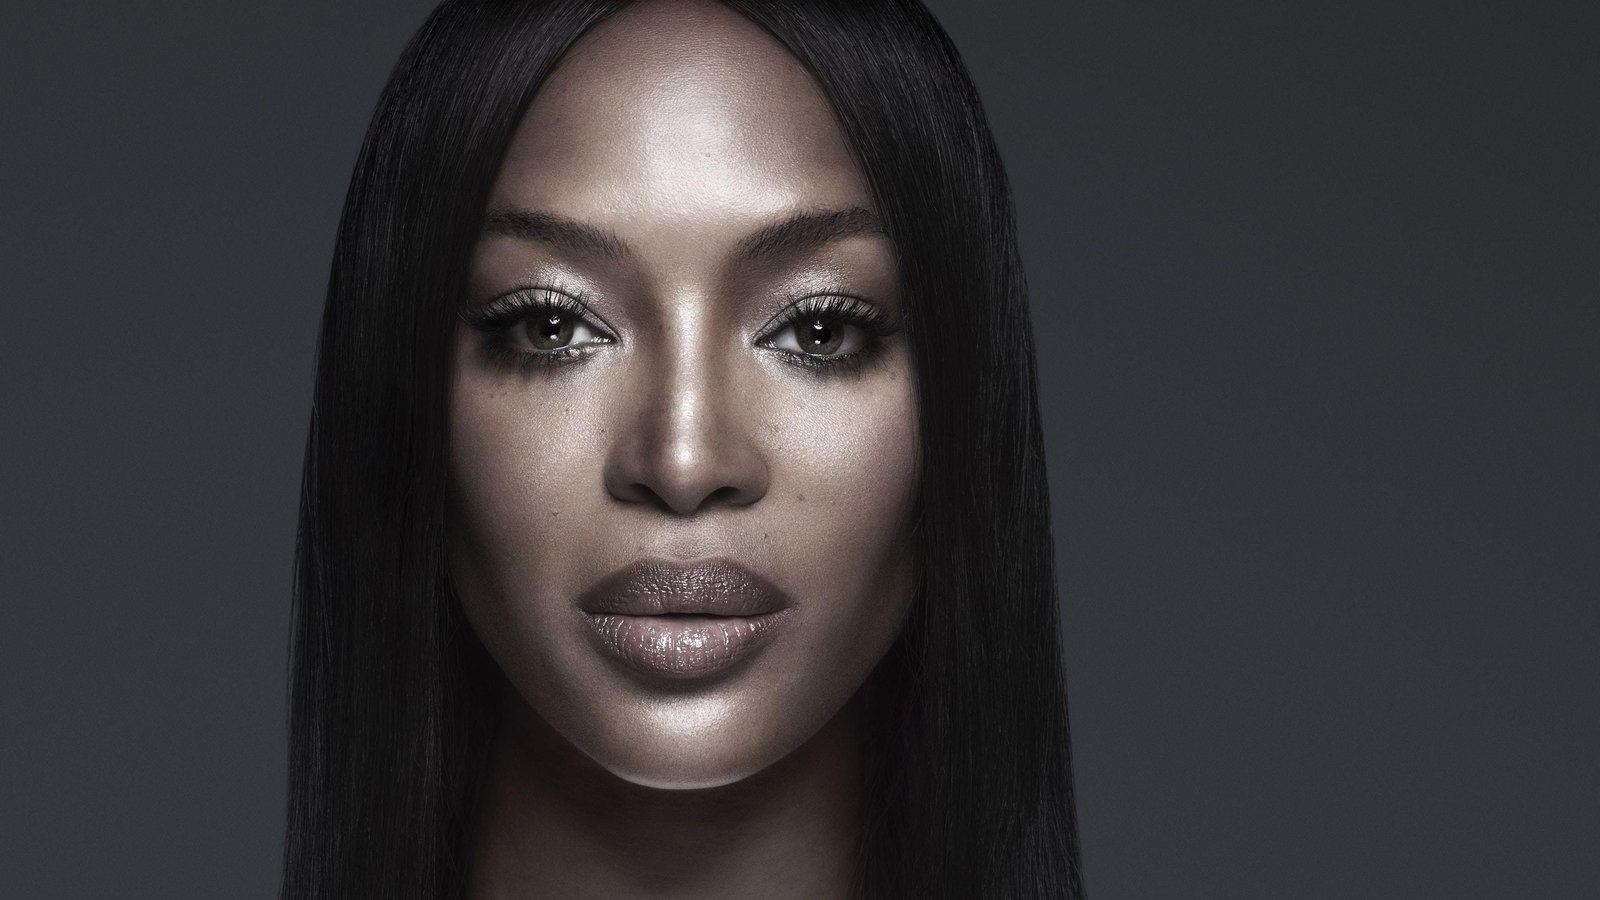 Naomi Campbell has landed her first ever beauty campaign